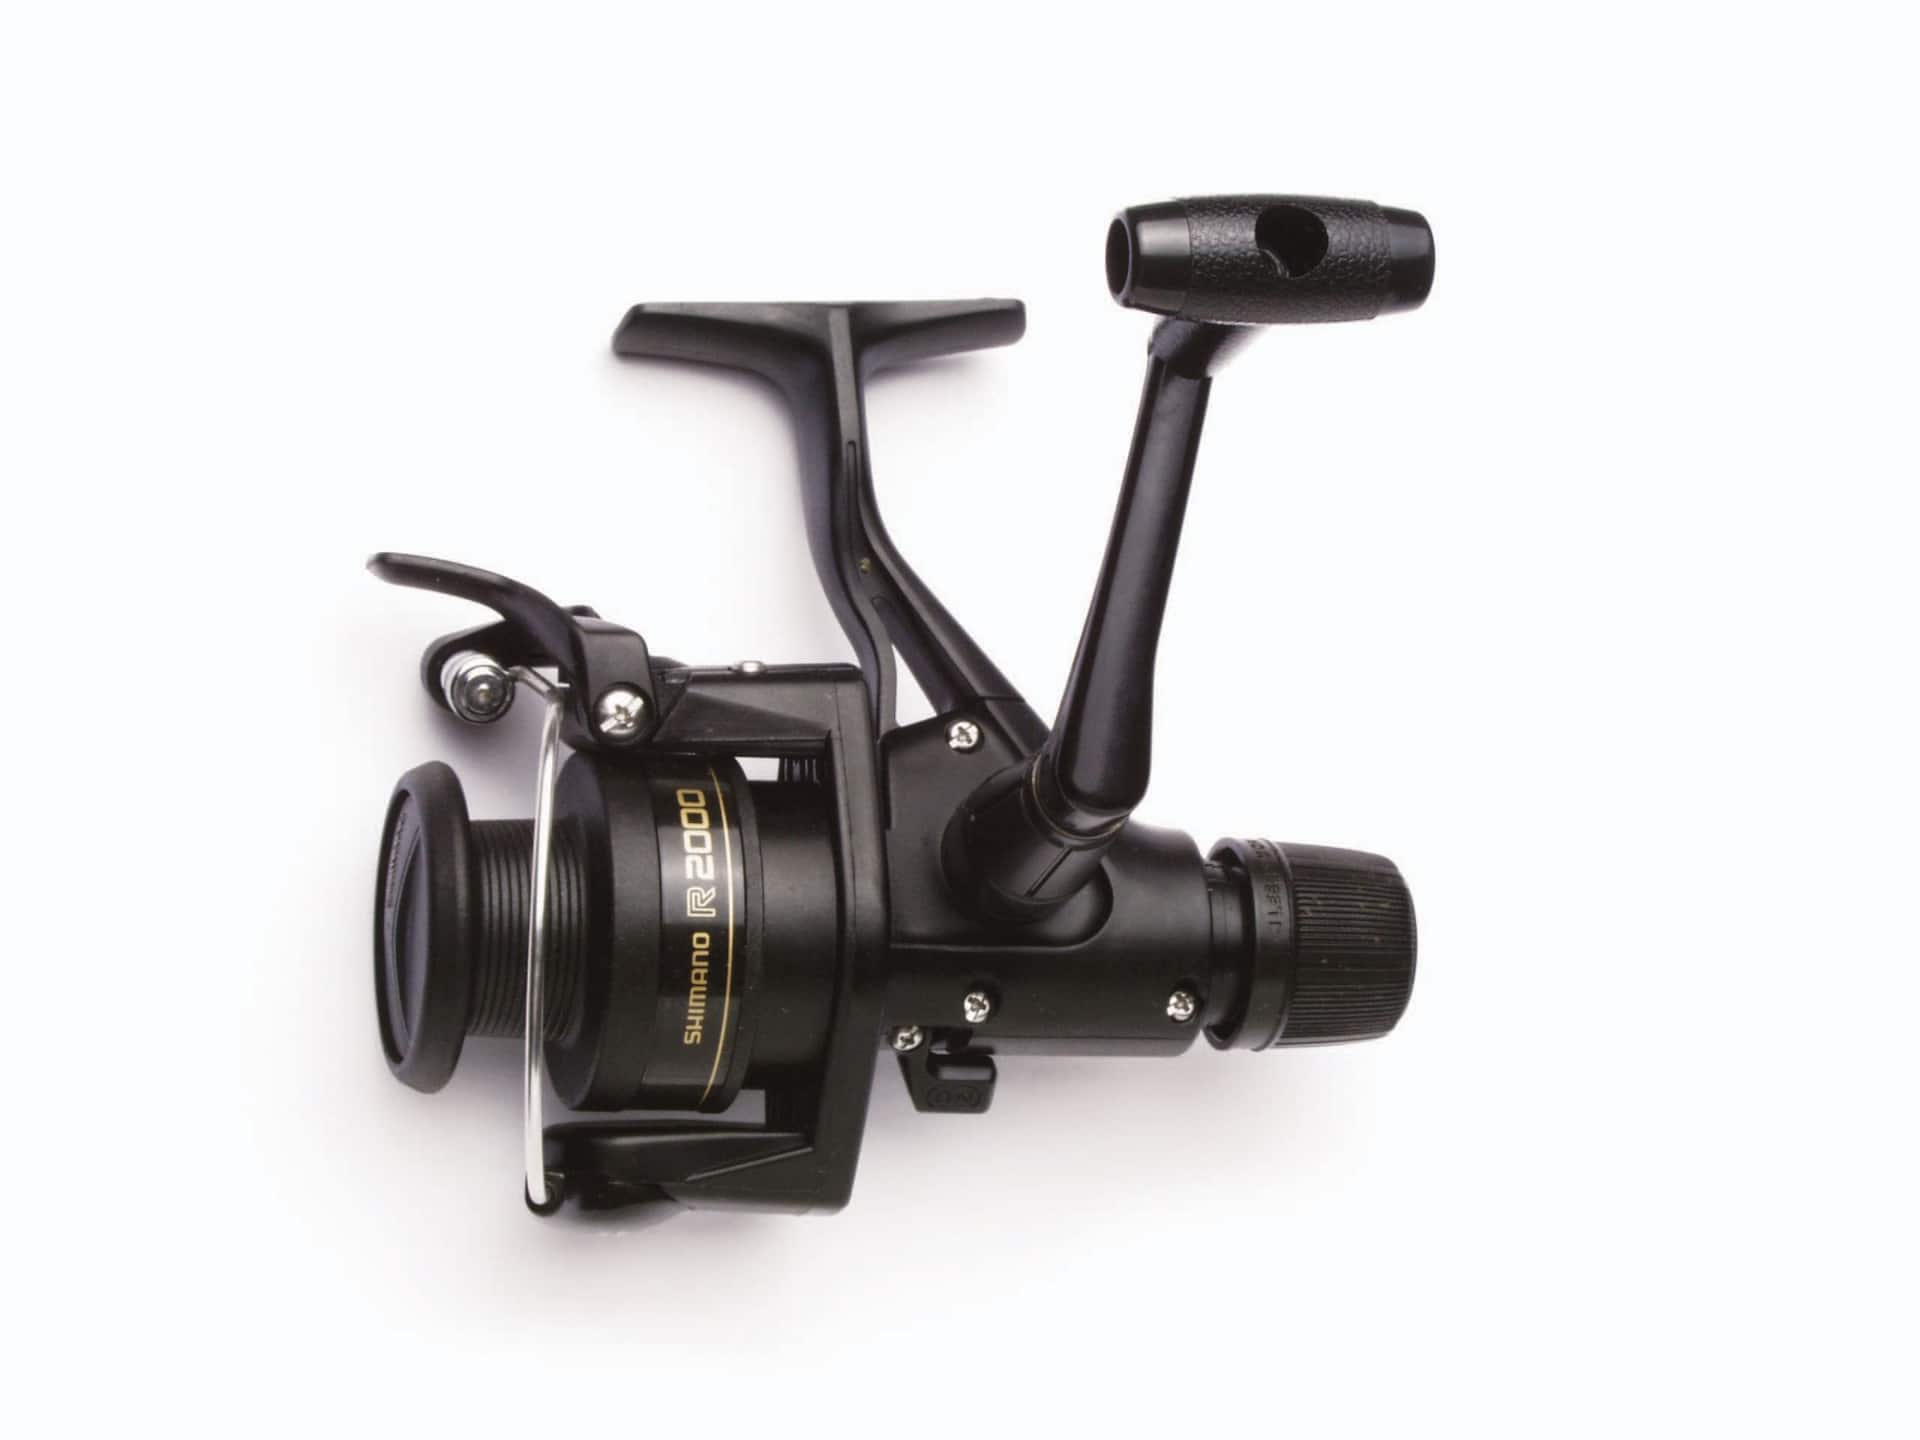  5.2:1 Gear Ratio Baitrunner Reel Fishing Tools 2000 Fishing  Reel Spinning Wheel for Lure Far Throwing Sea Rod : Sports & Outdoors